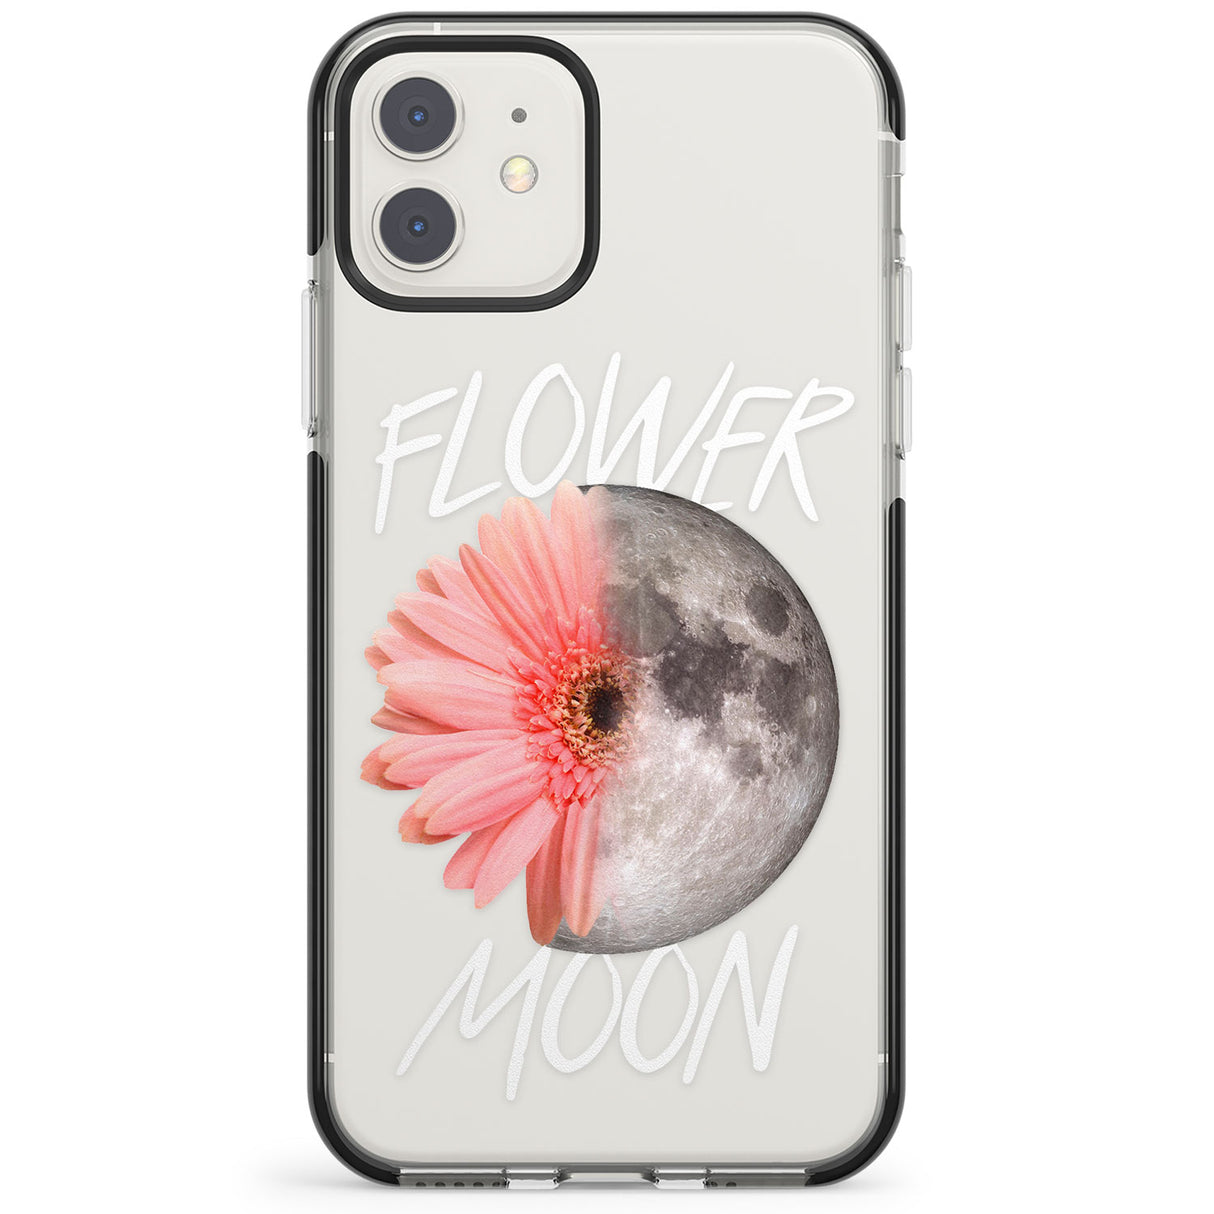 Flower Moon Impact Phone Case for iPhone 11, iphone 12